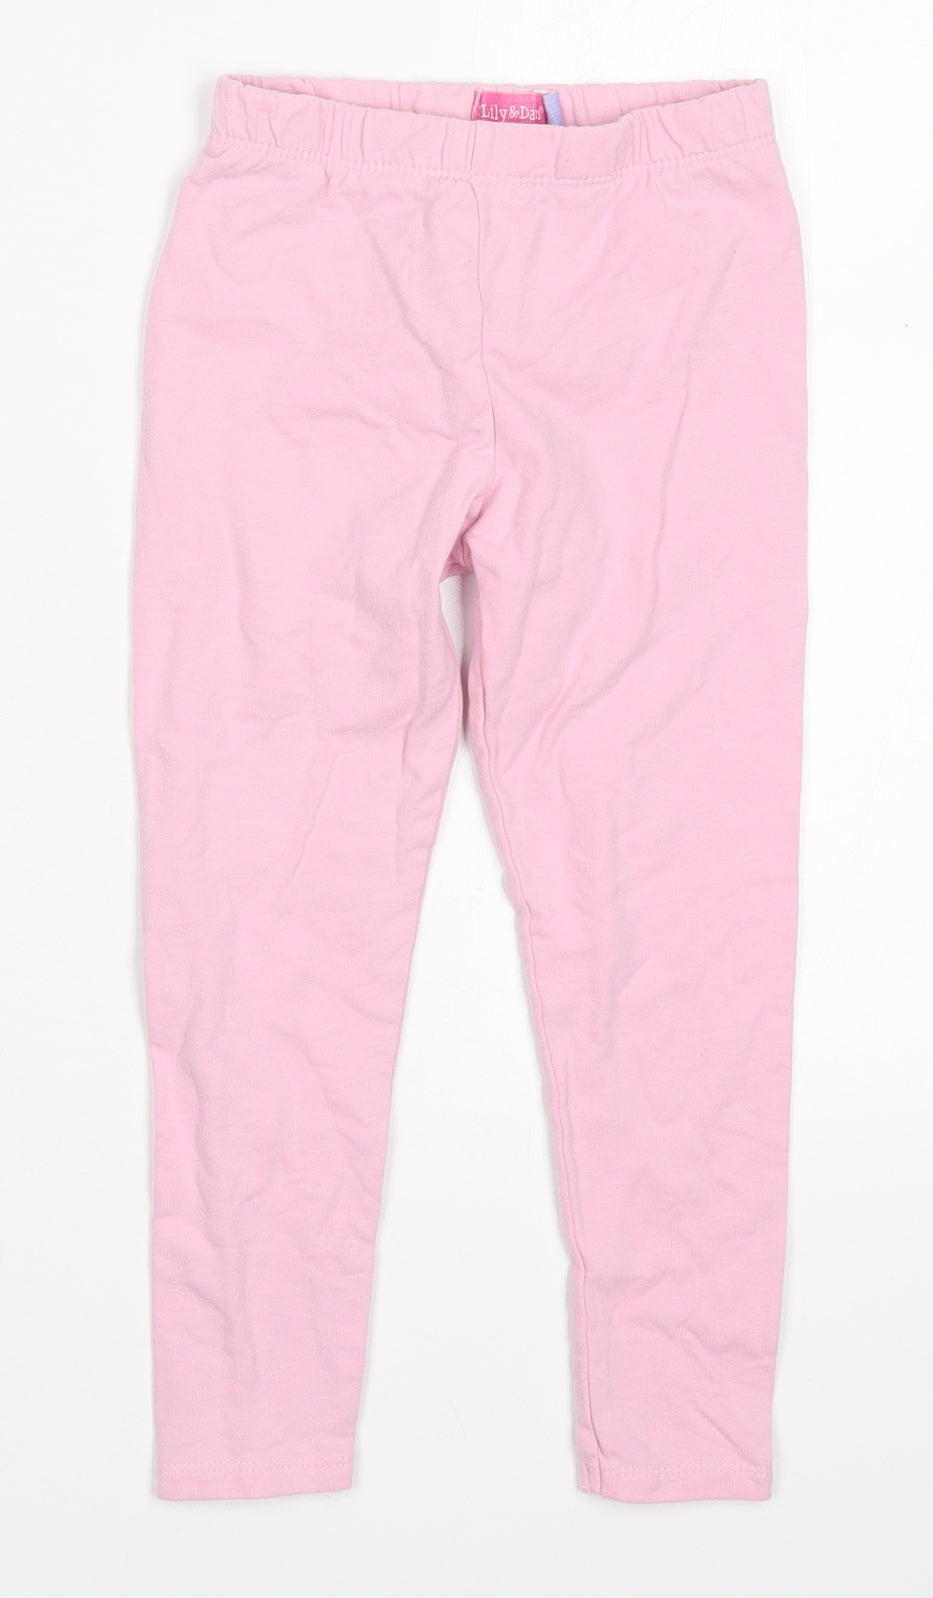 Lily & Dan Girls Pink  Cotton Carrot Trousers Size 3-4 Years  Regular